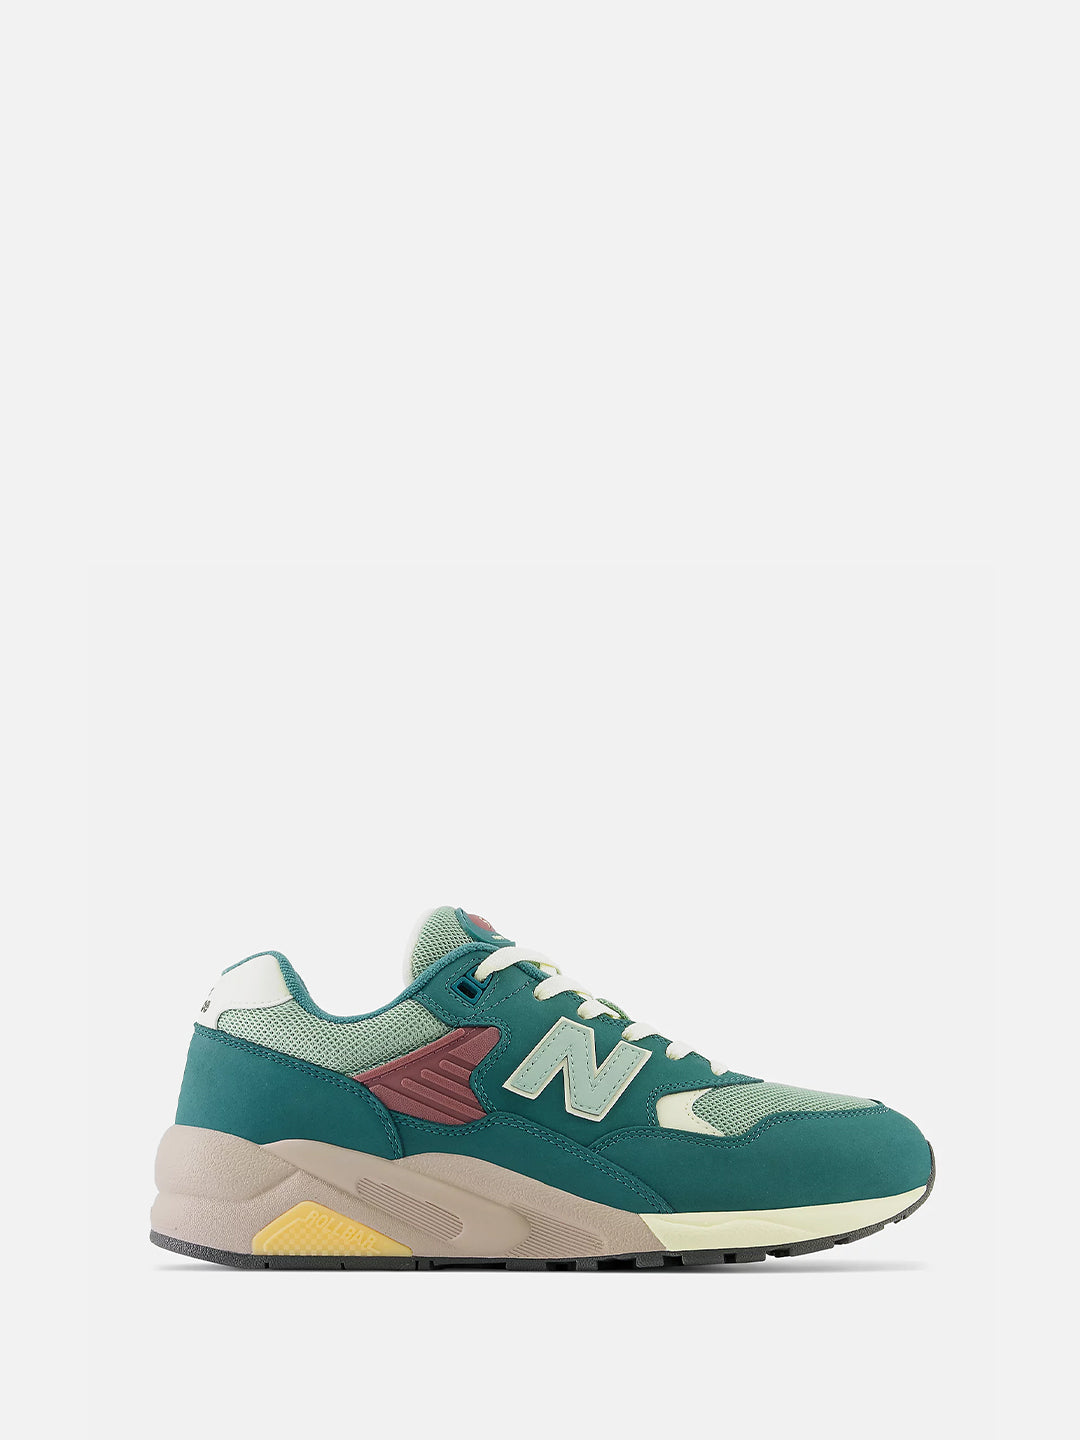 New Balance 580 green sneakers